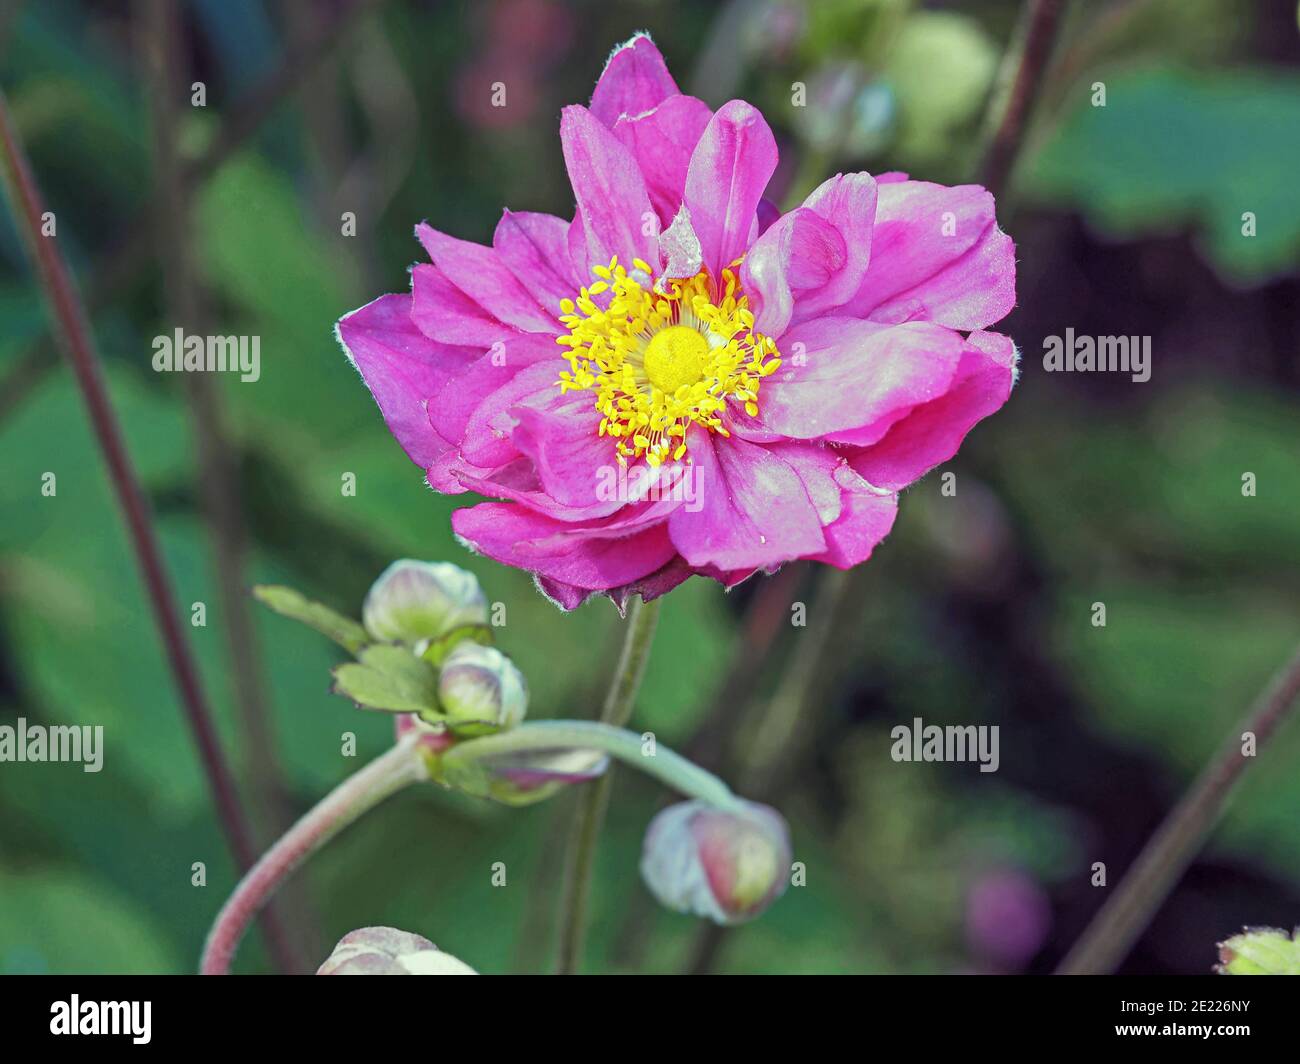 Closeup of a beautiful pink anemone flower and buds in a garden Stock Photo